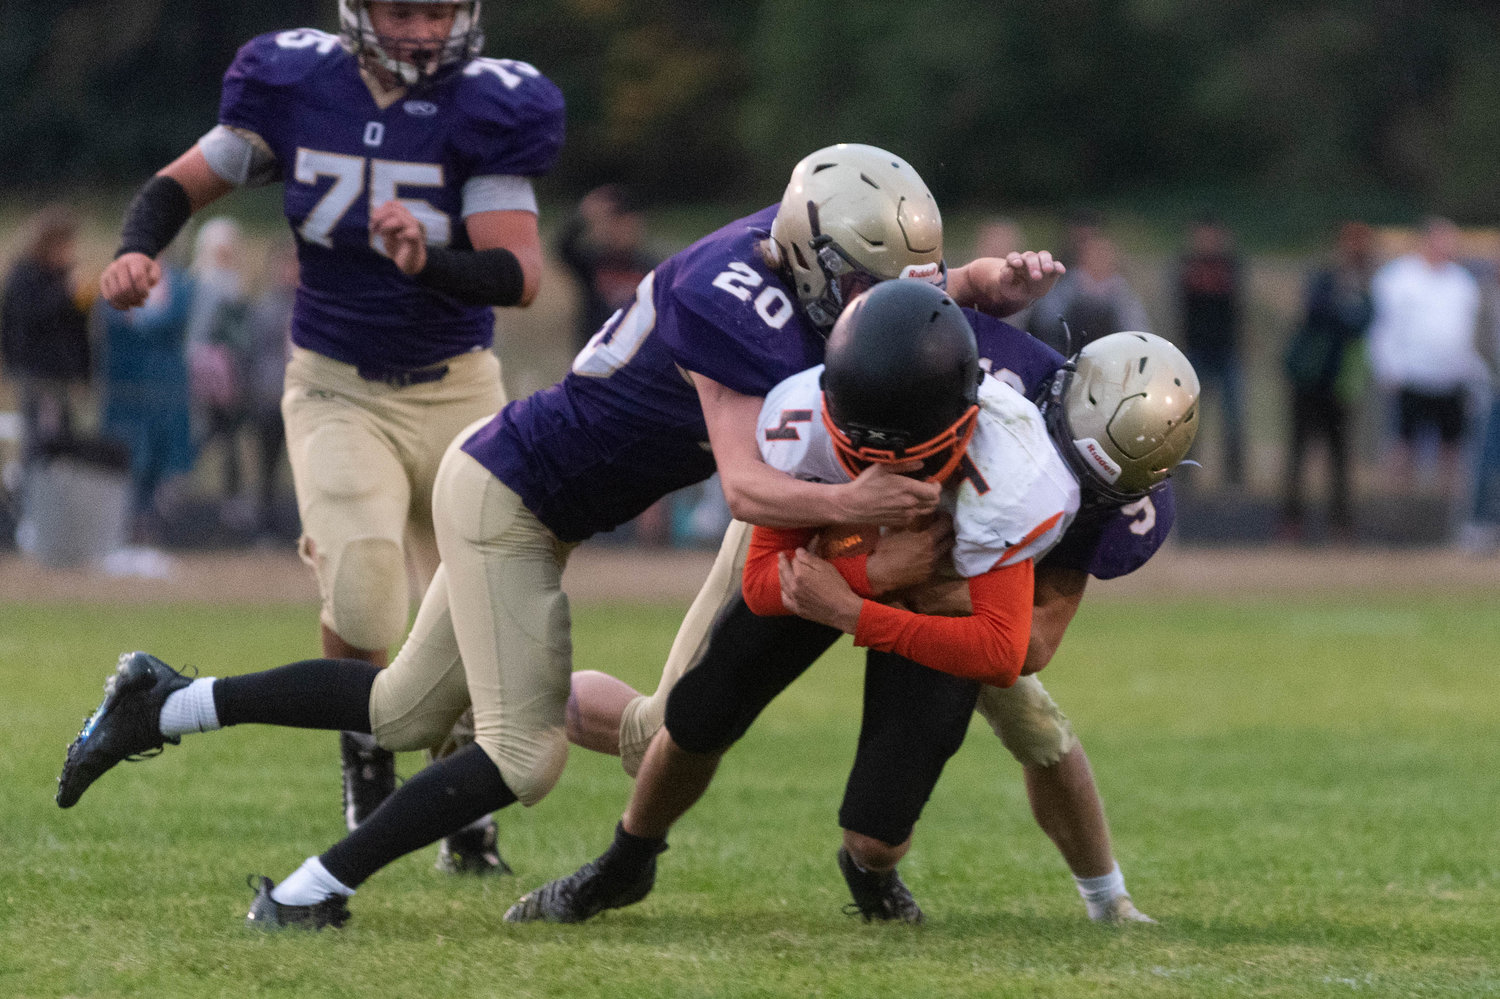 Napavine quarterback Ashton Demarest is brought down by two Onalaska defenders in the Tigers win over the Loggers Friday night.